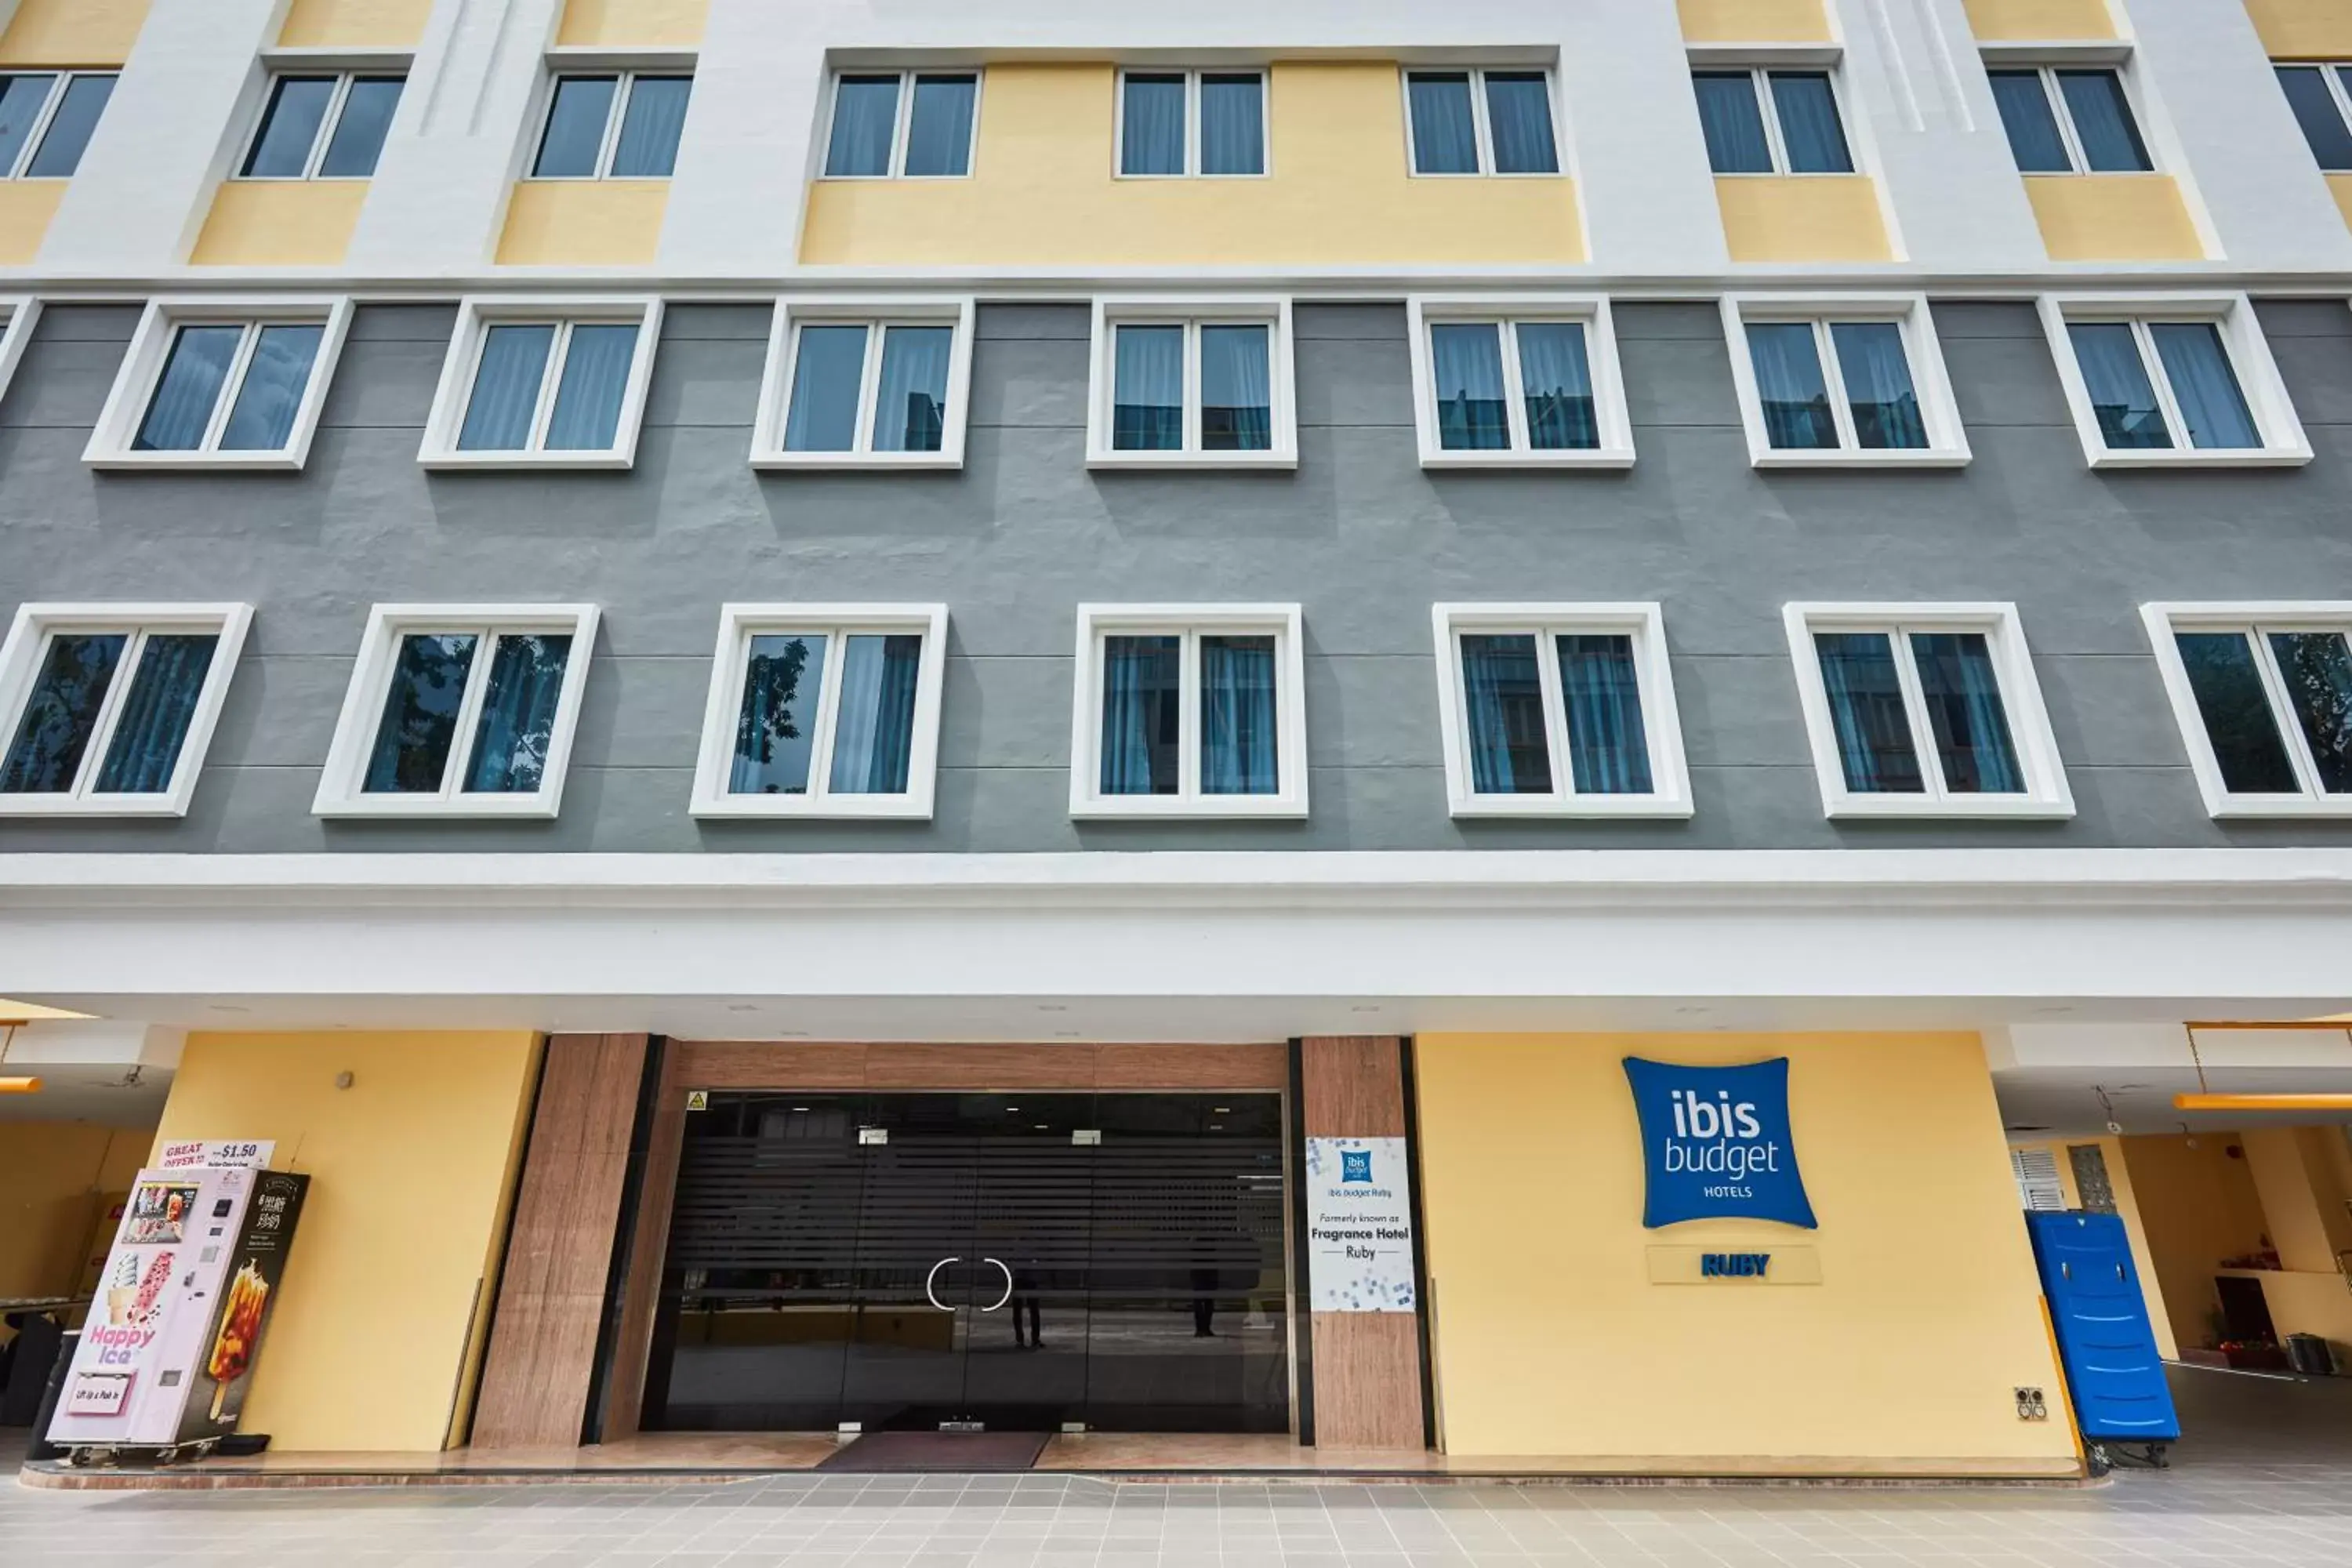 Facade/entrance, Property Building in ibis budget Singapore Ruby